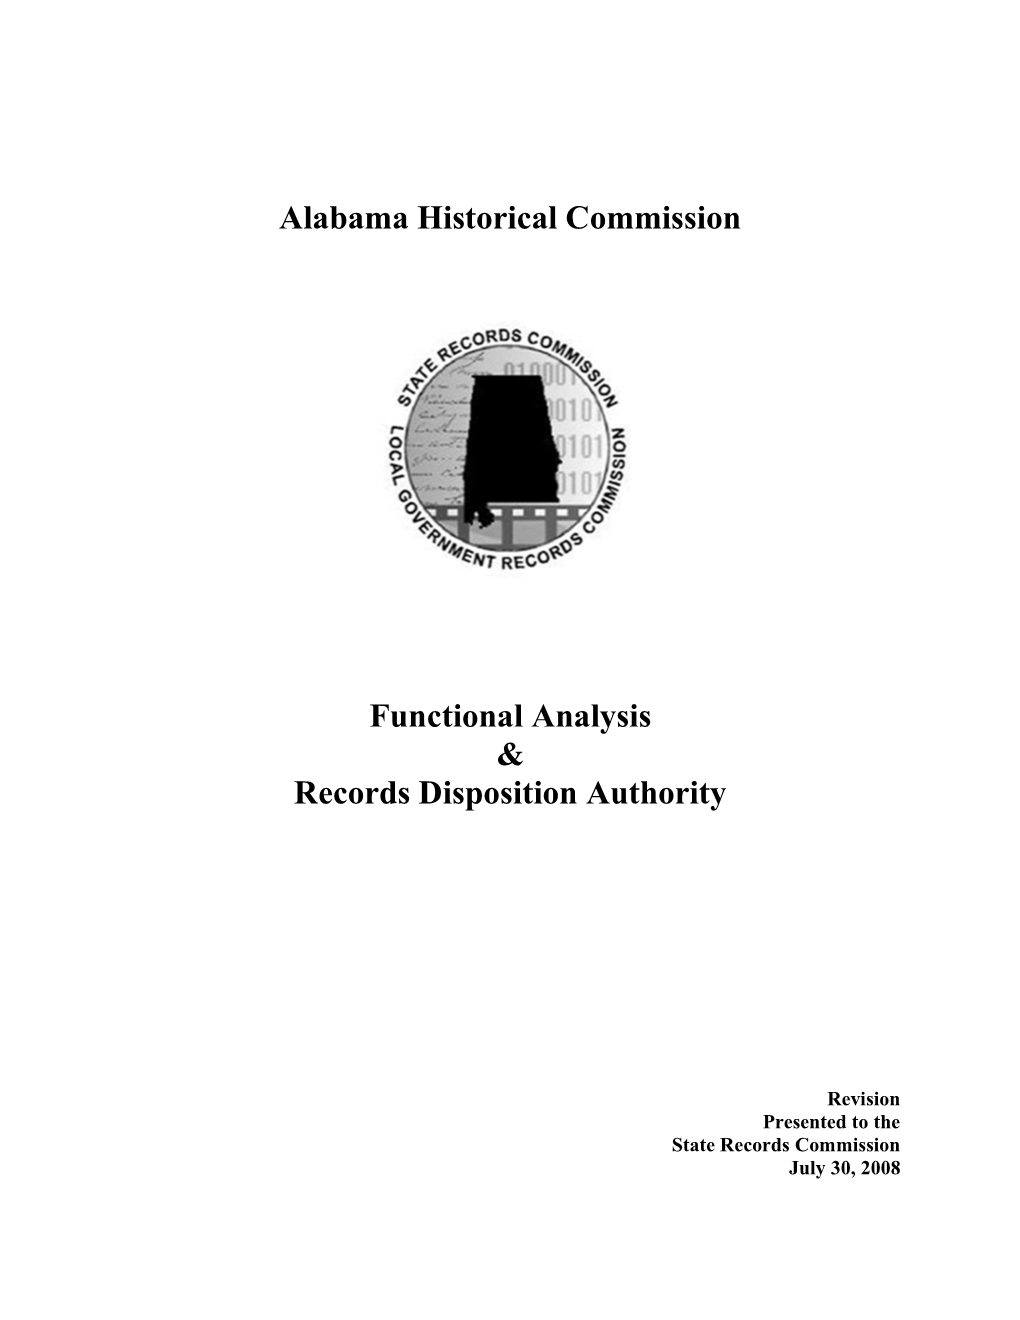 Alabama Historical Commission Functional Analysis & Records